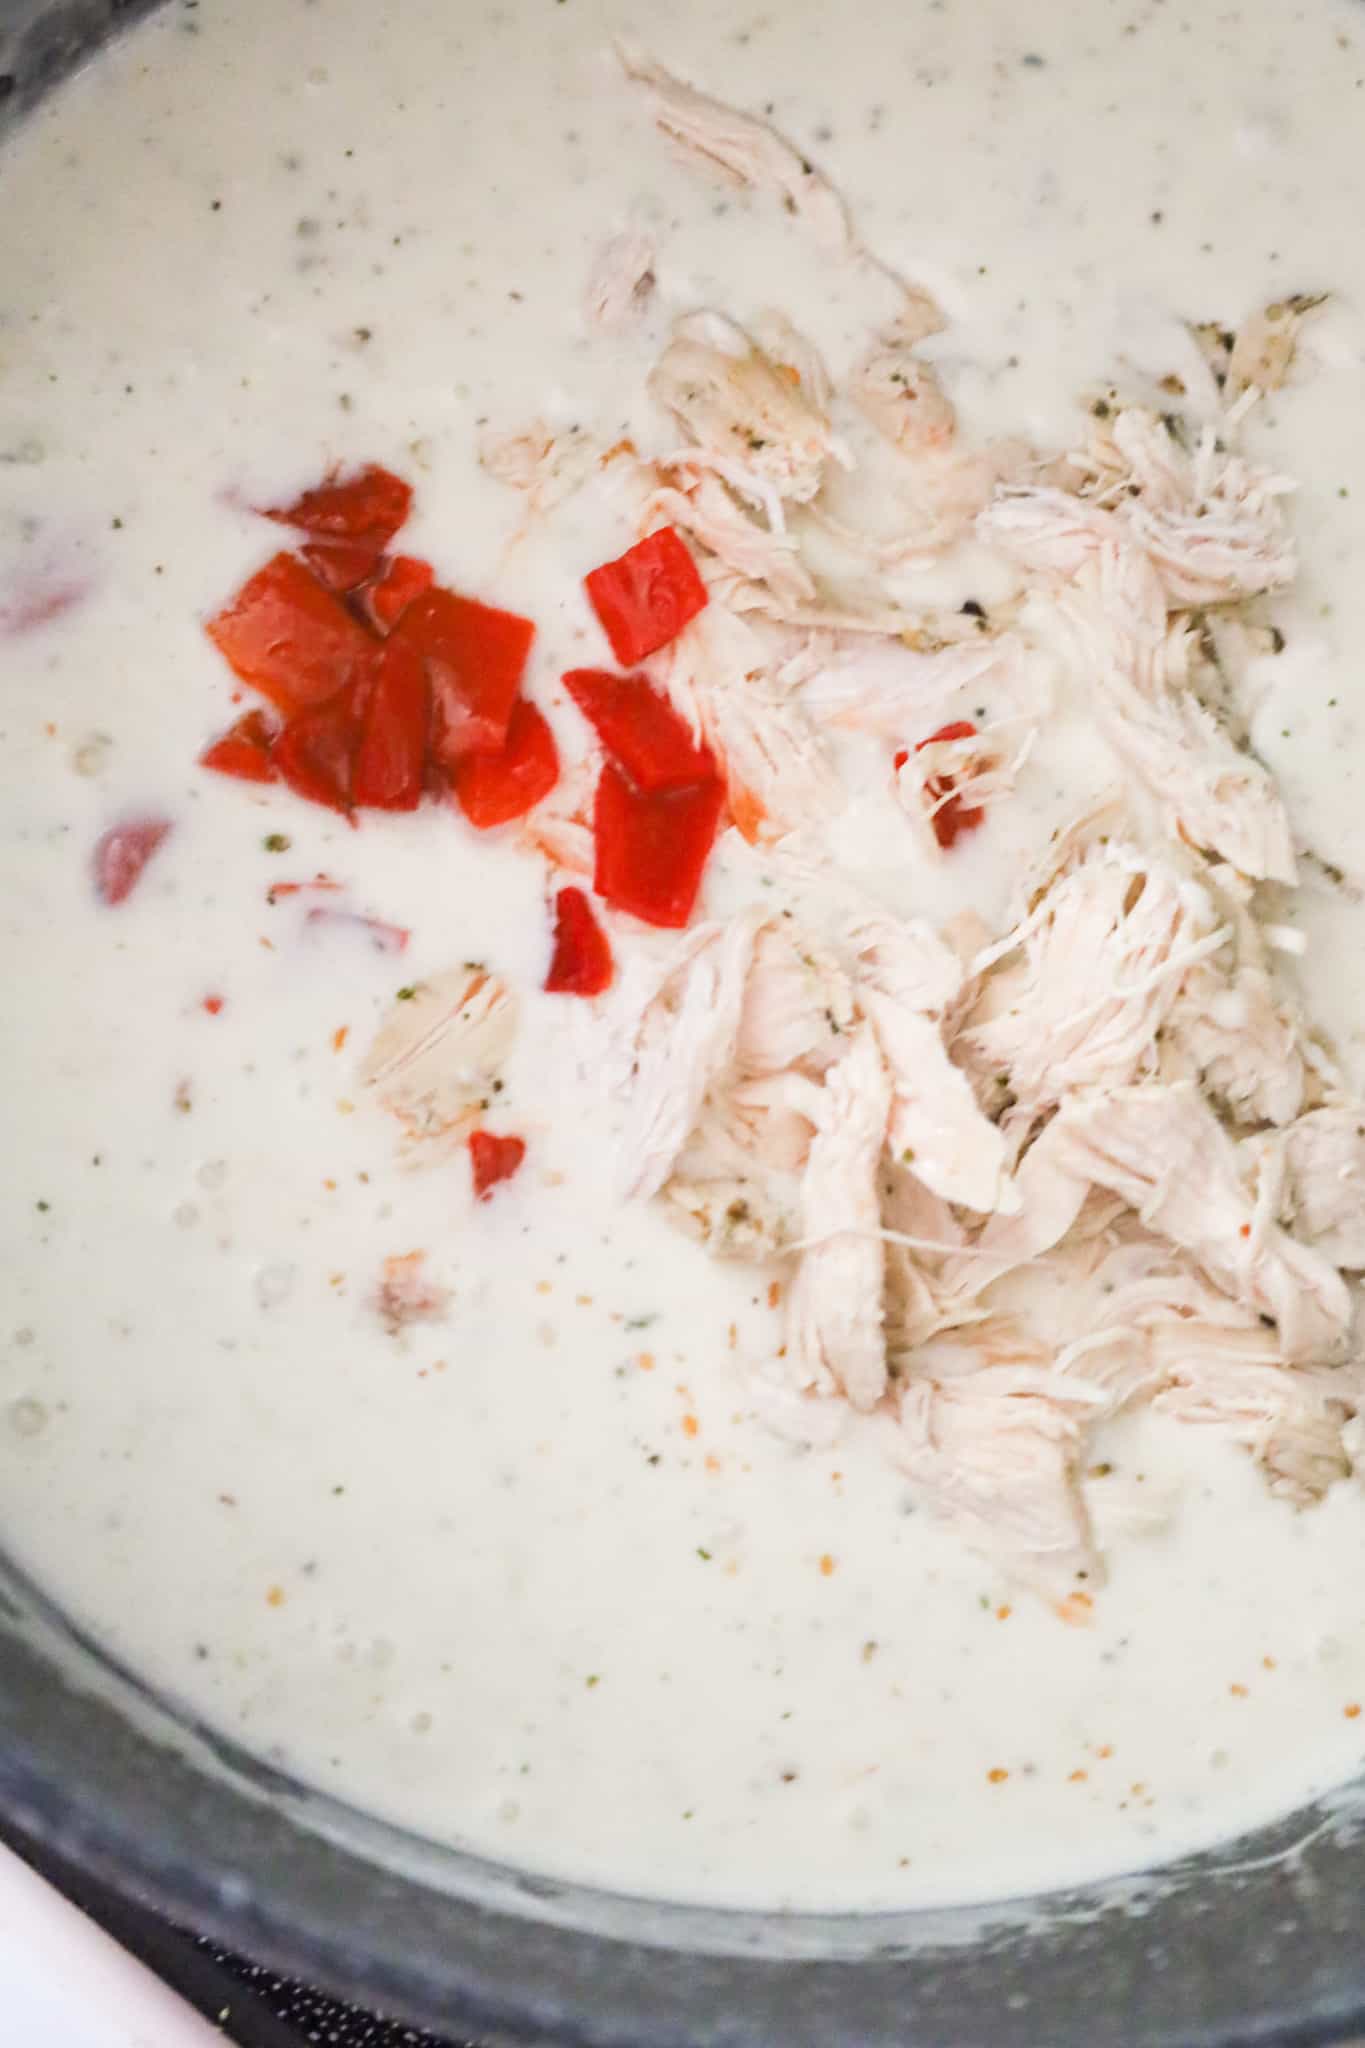 roasted red peppers and shredded chicken added to creamy soup mixture